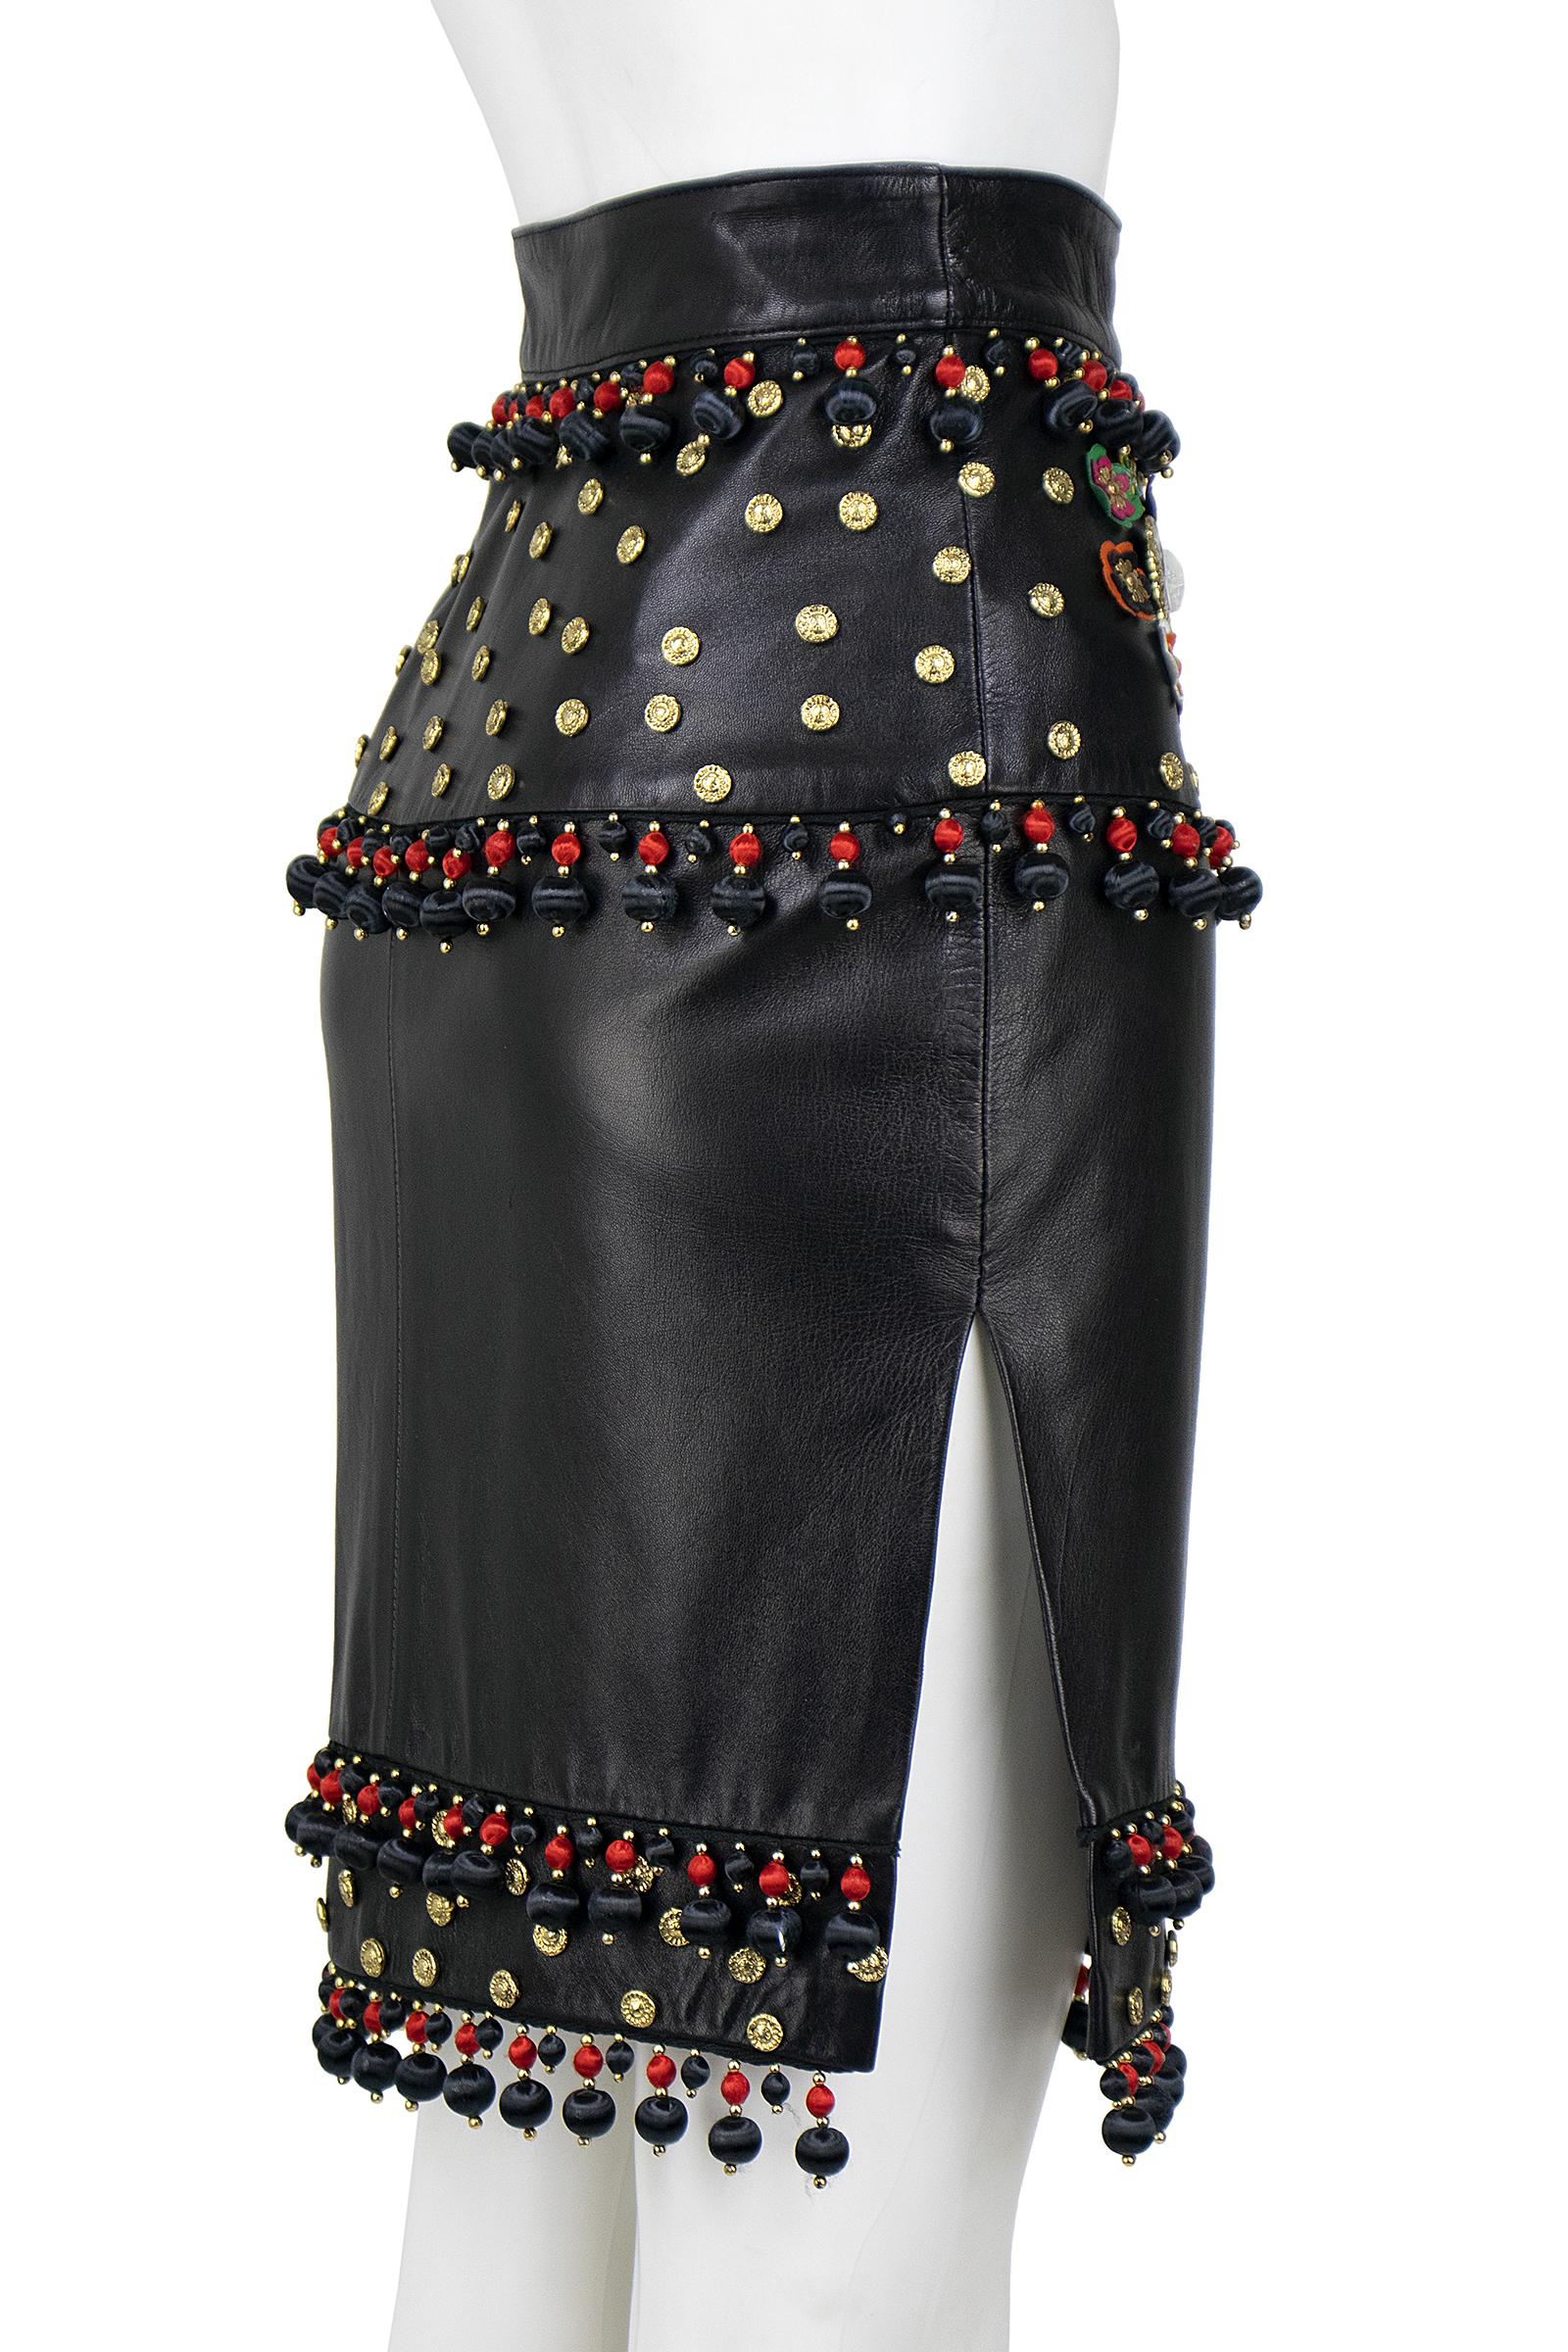 Moschino Circa 1990s Black Leather Skirt with Tassels, Metal Studs and Flowers For Sale 1